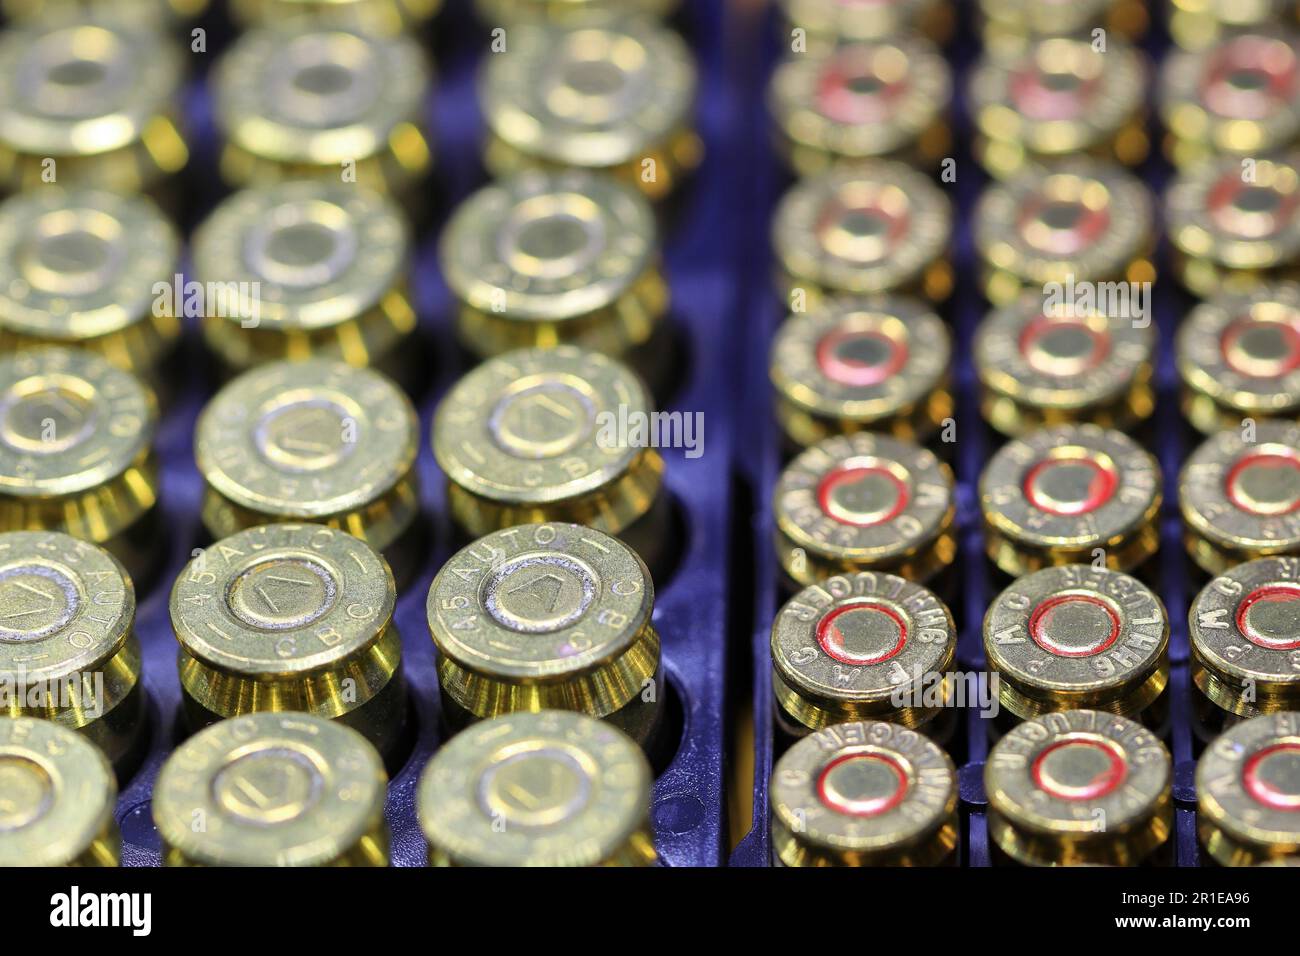 Row of Rim and primer of .45 or 11mm and 9mm para cartridges. Stock Photo